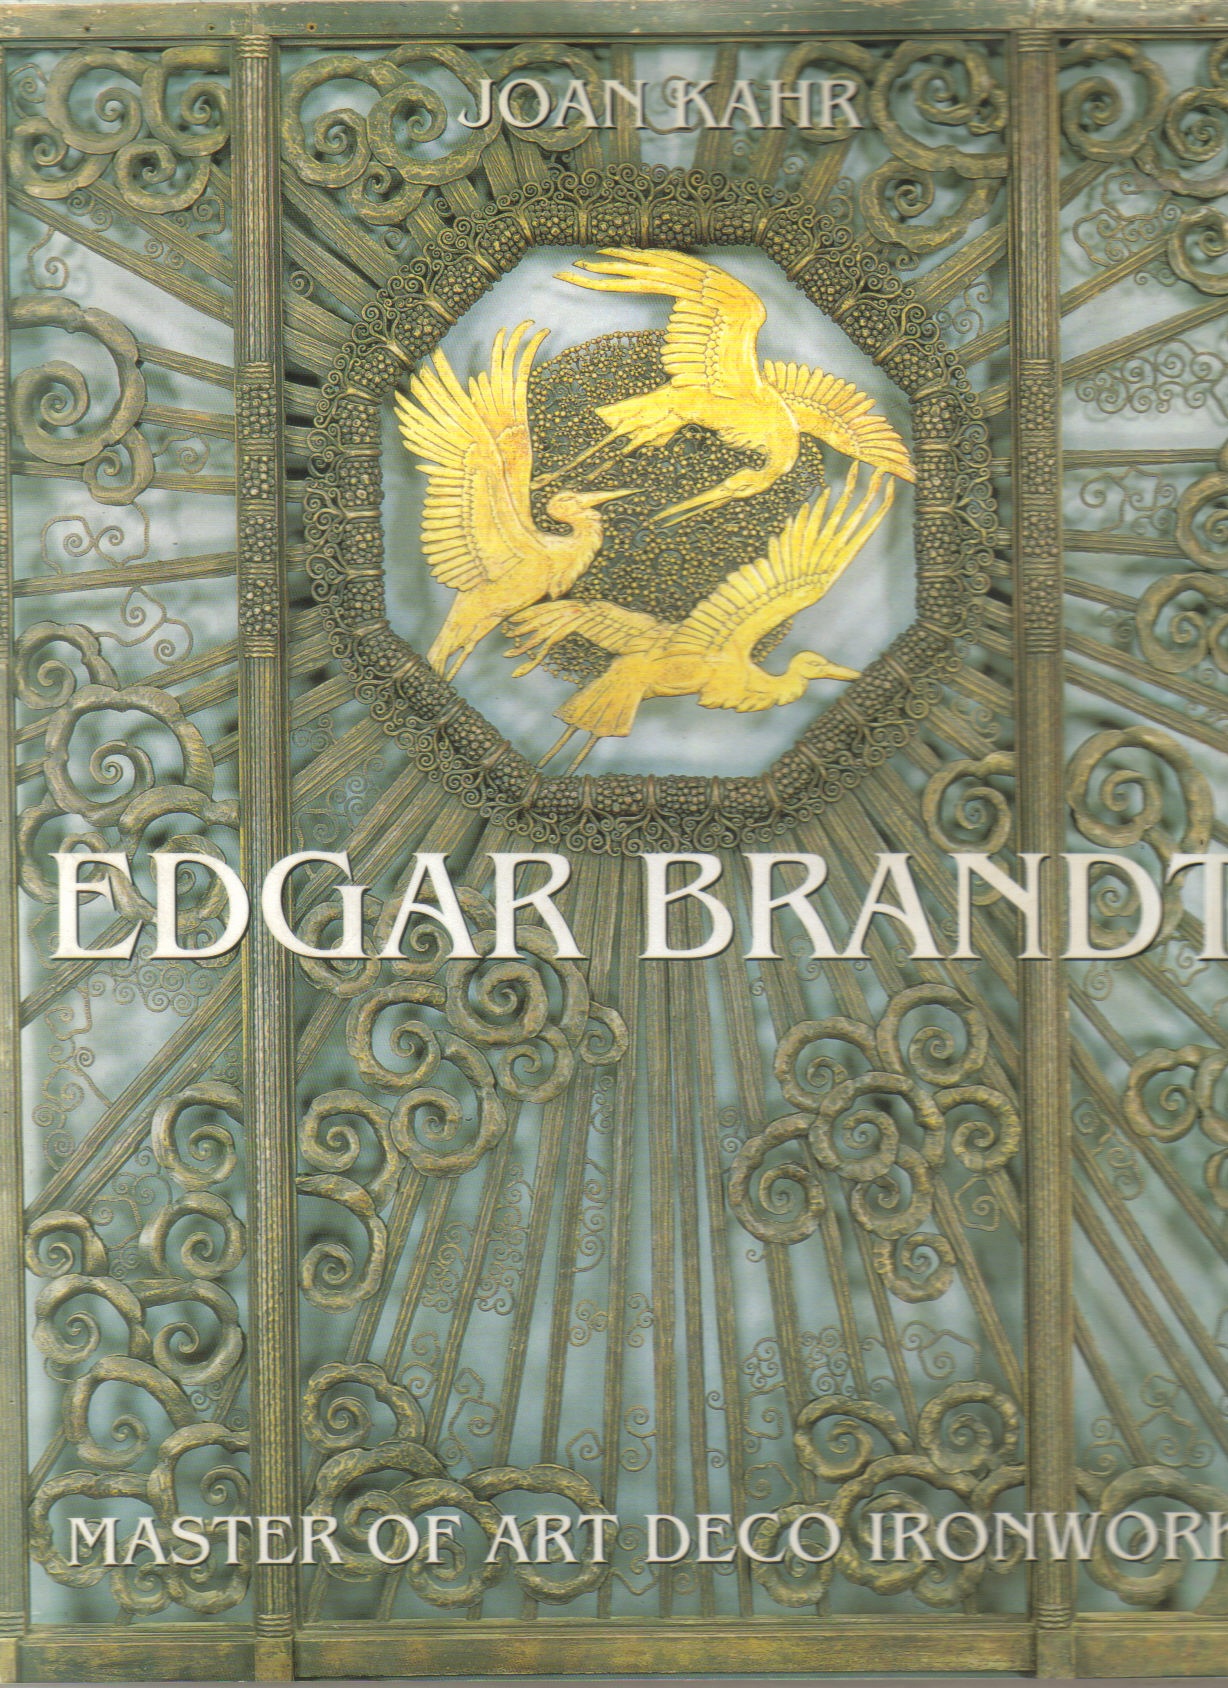 Edgar Brandt by Joan Kahr - Front Cover